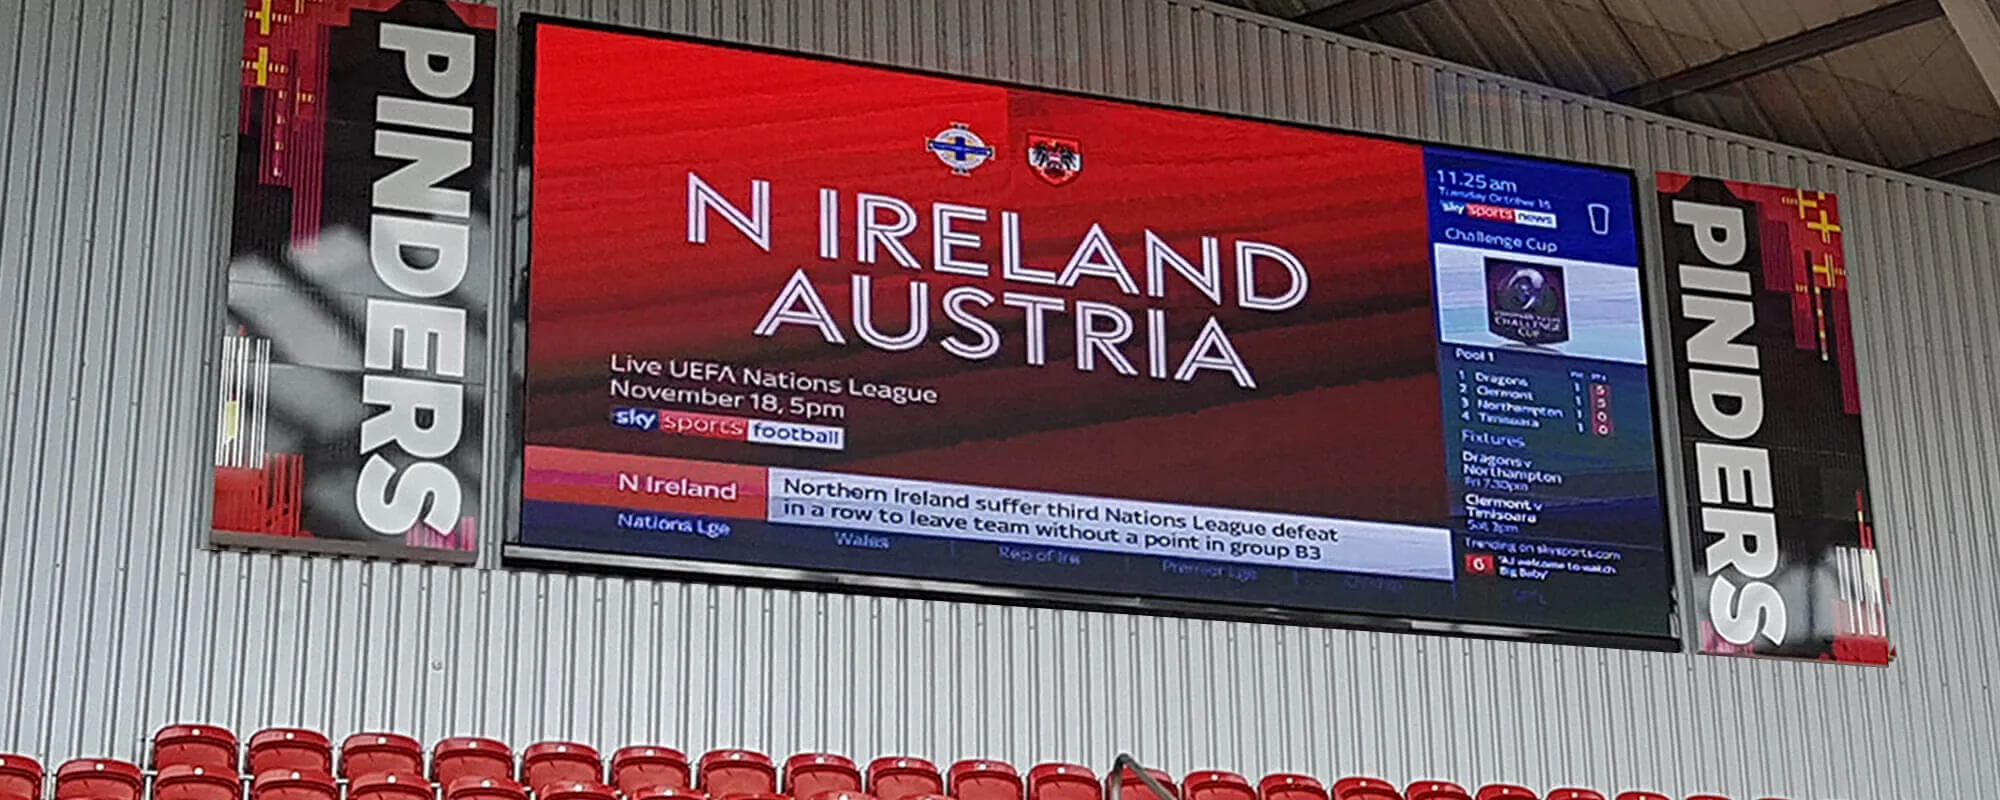 LED display screens for sporting events in the UK from LEDsynergy 